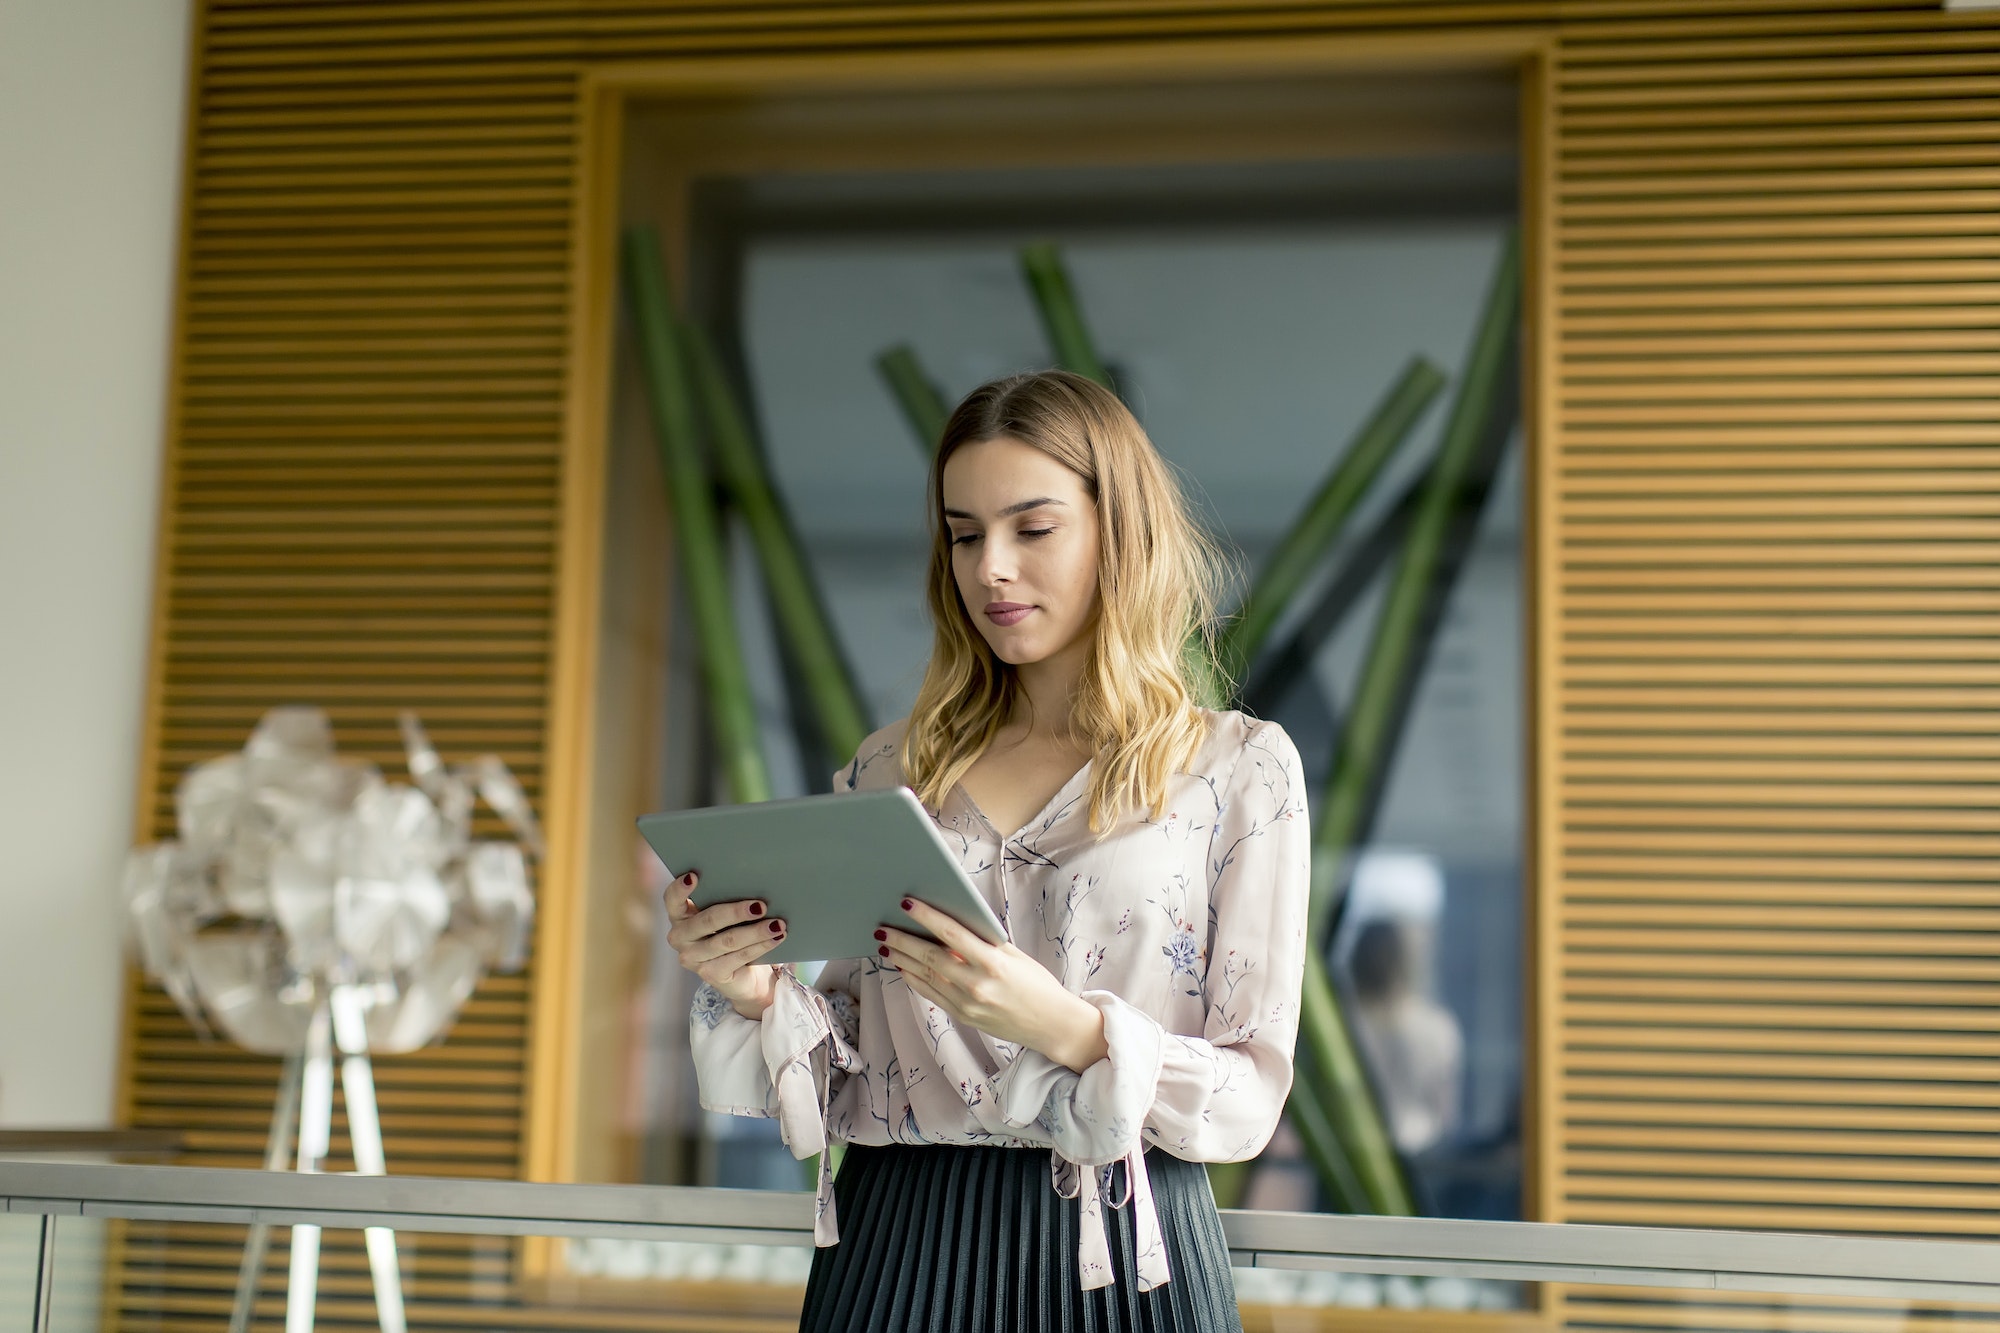 Attractive businesswoman using a digital tablet while standing in the office